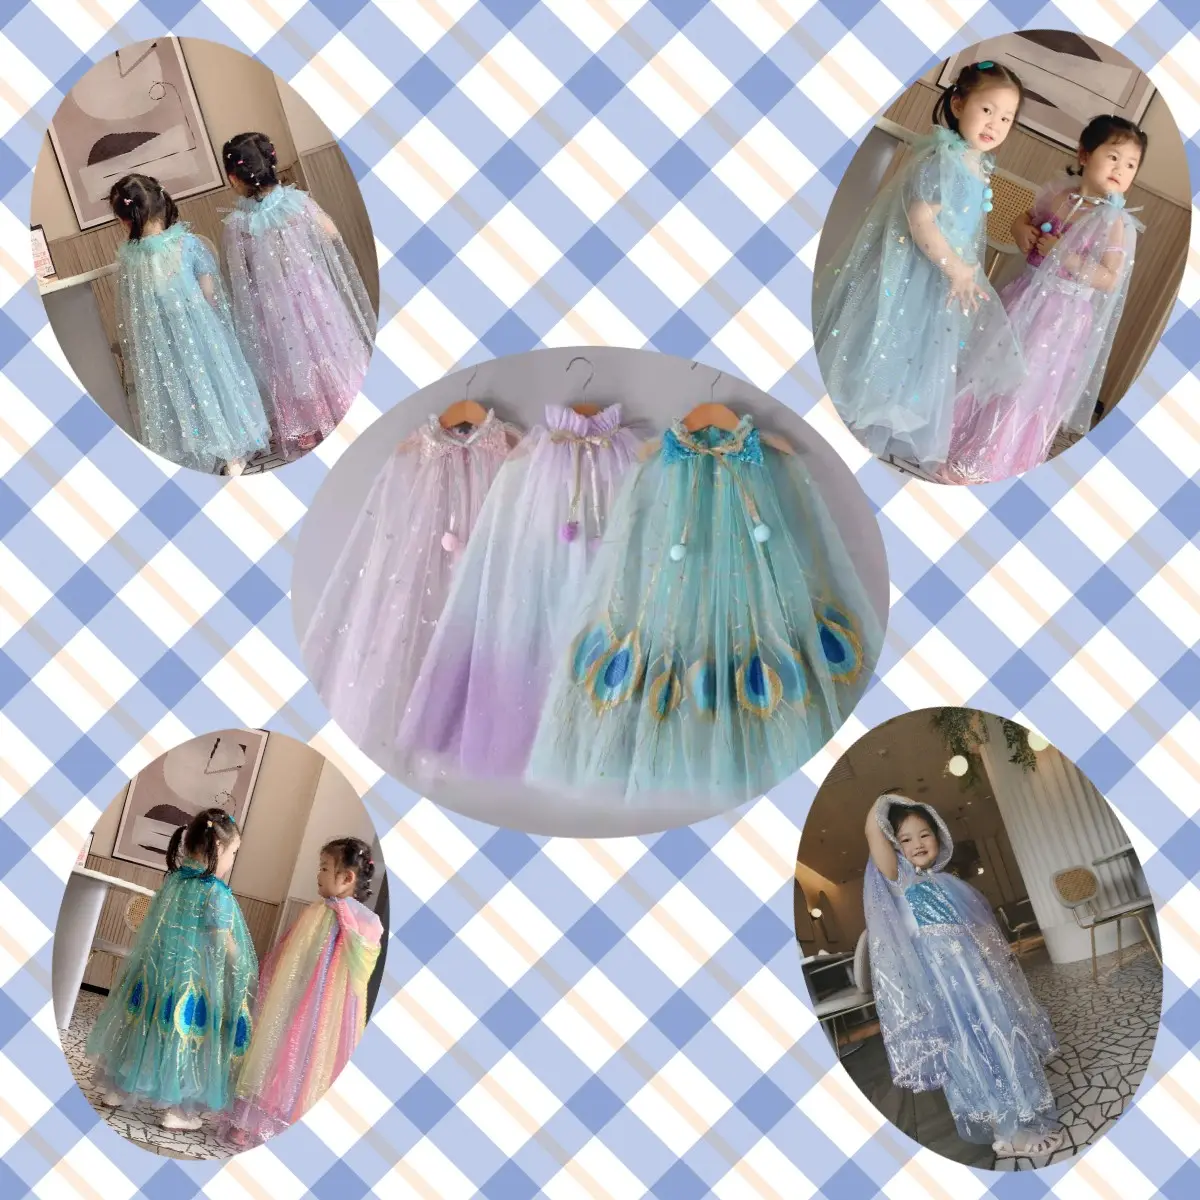 Yiwu Yiyuan Garment soft kids costumes party wear girls cape for children boutique girl princess colorful tulle Sparkle cape